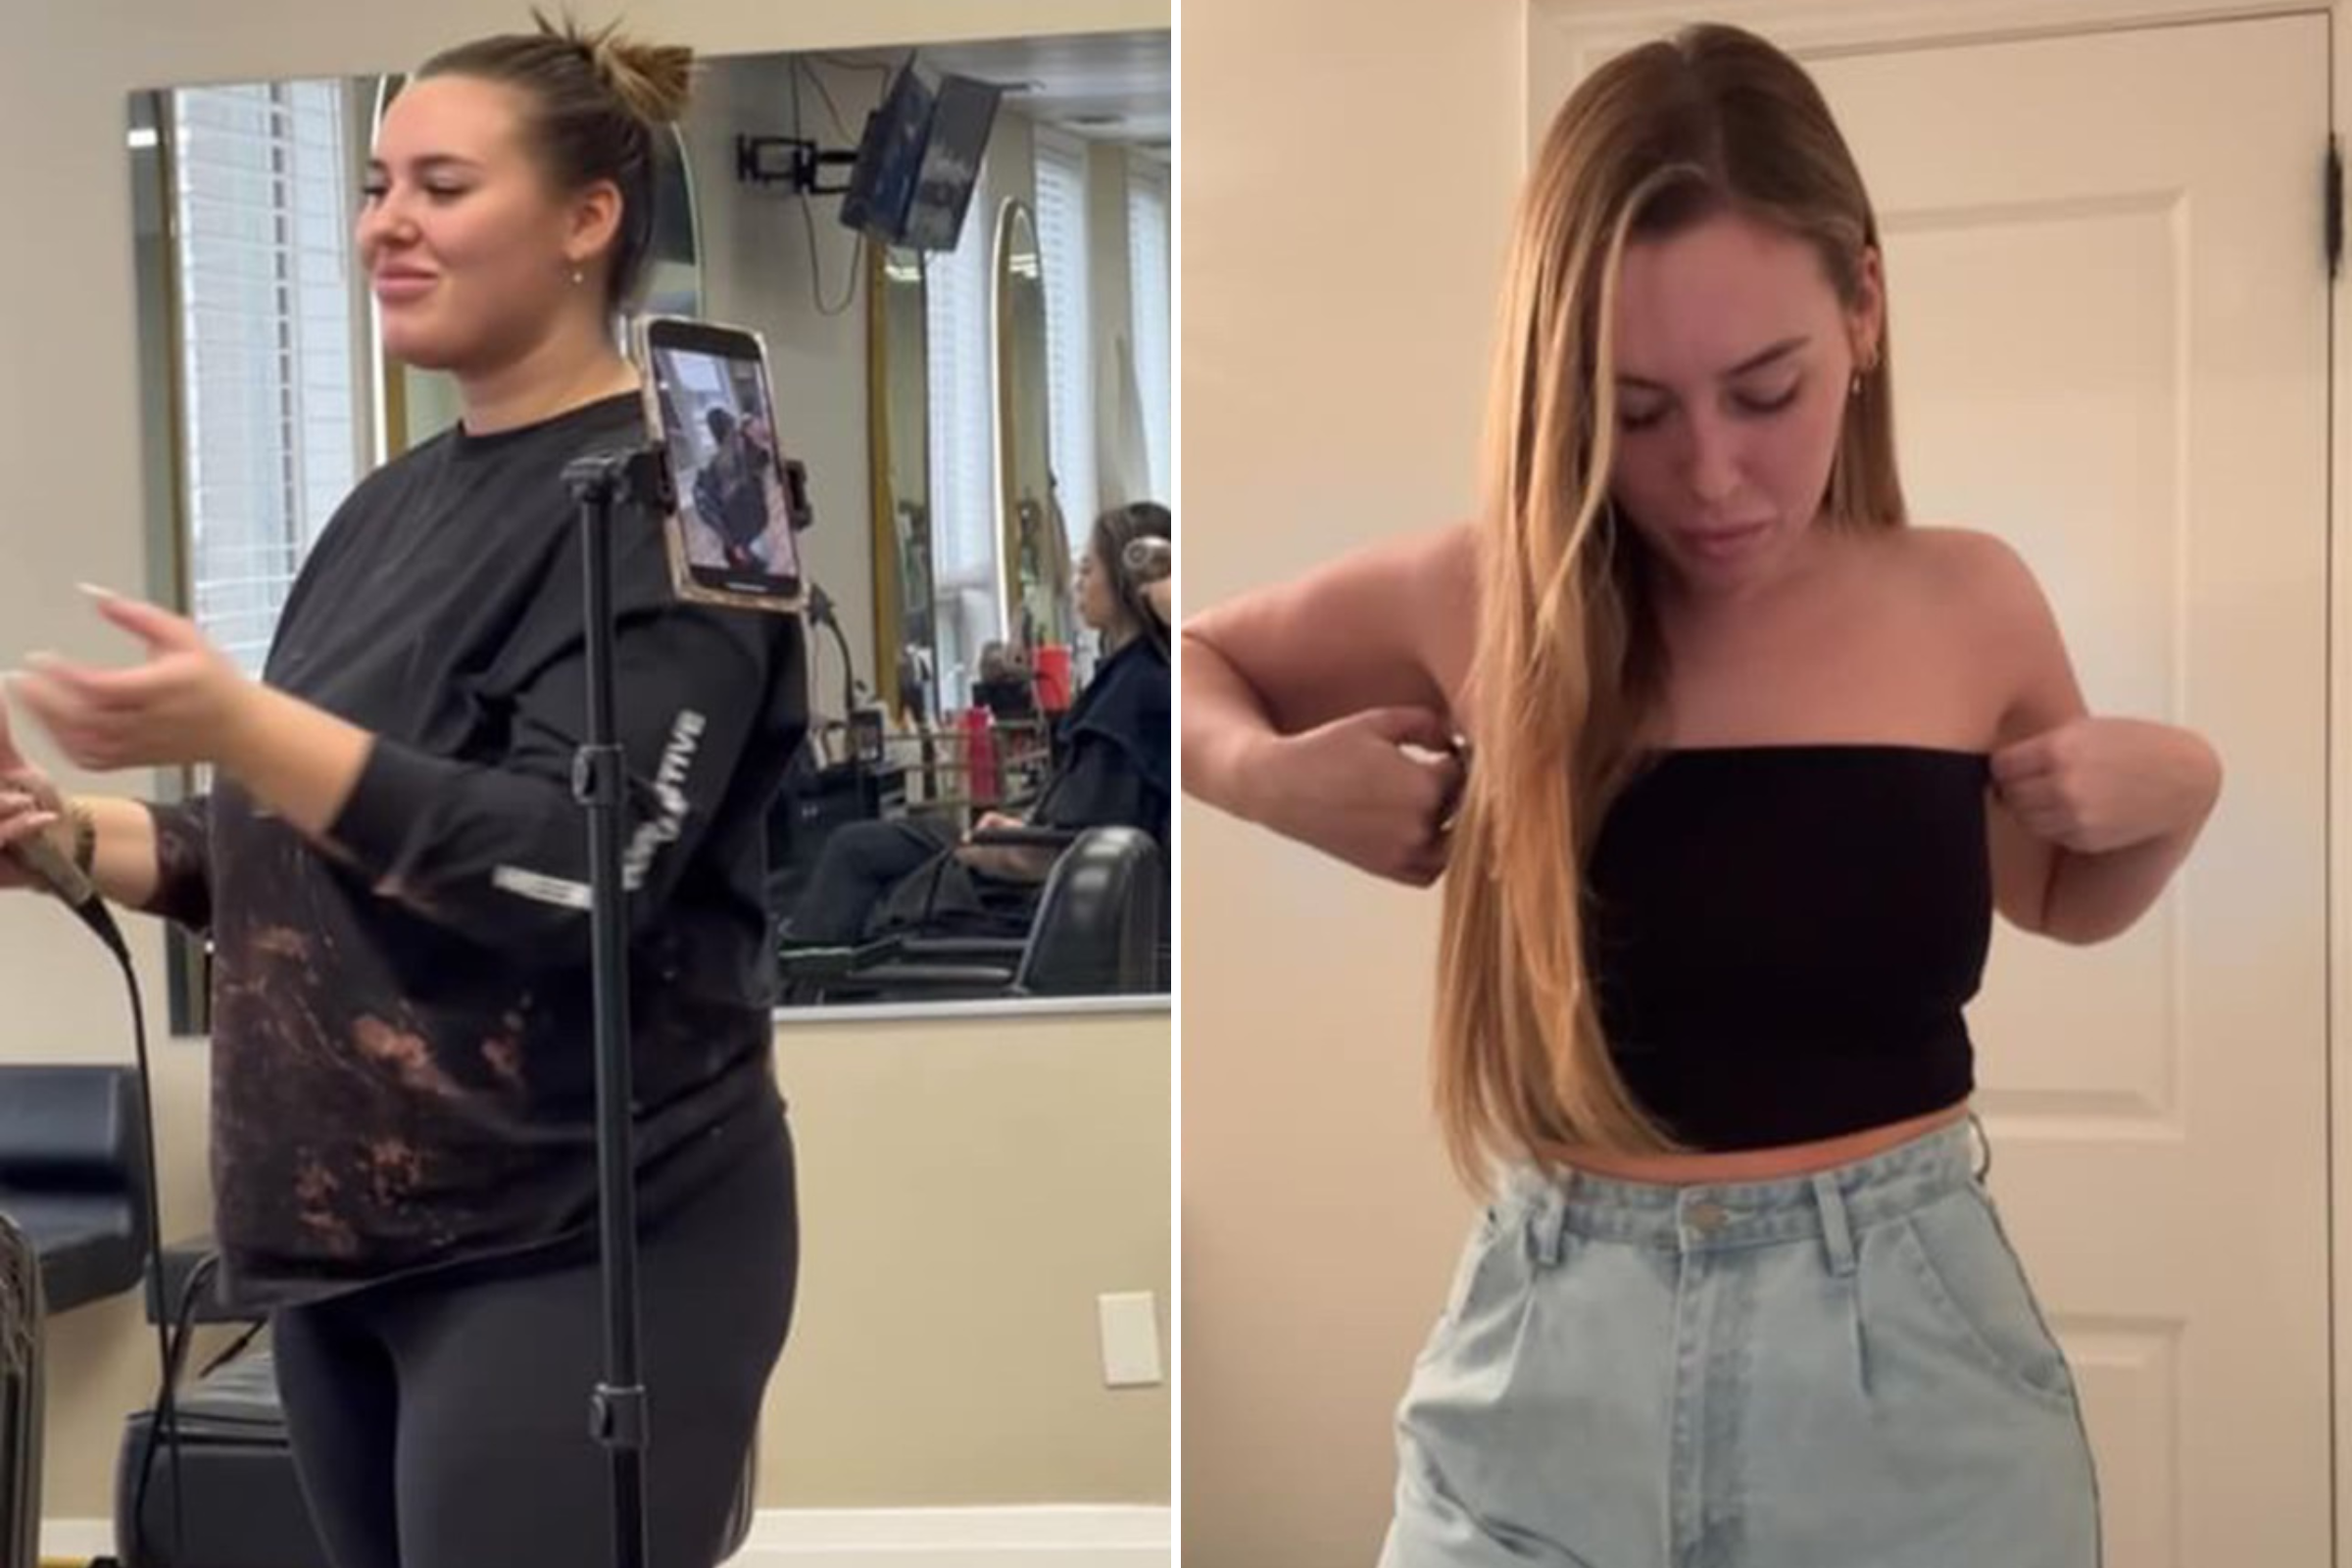 Woman Claims “Dirty Keto Lifestyle” Helped Her Shed 90lbs In A Year